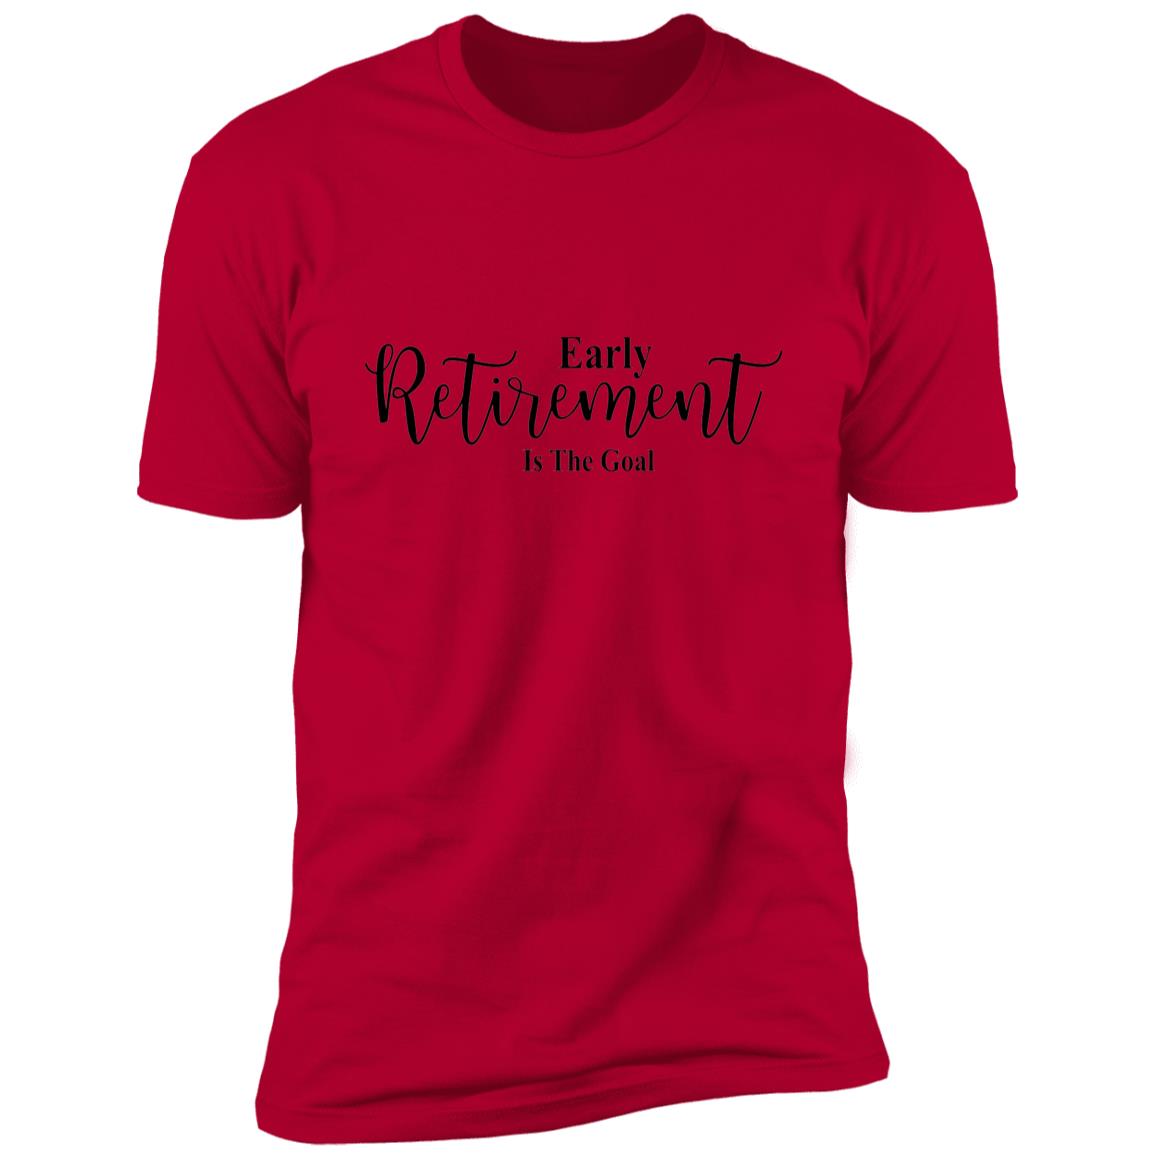 Early Retirement Is The Goal - Premium Short Sleeve T-Shirt